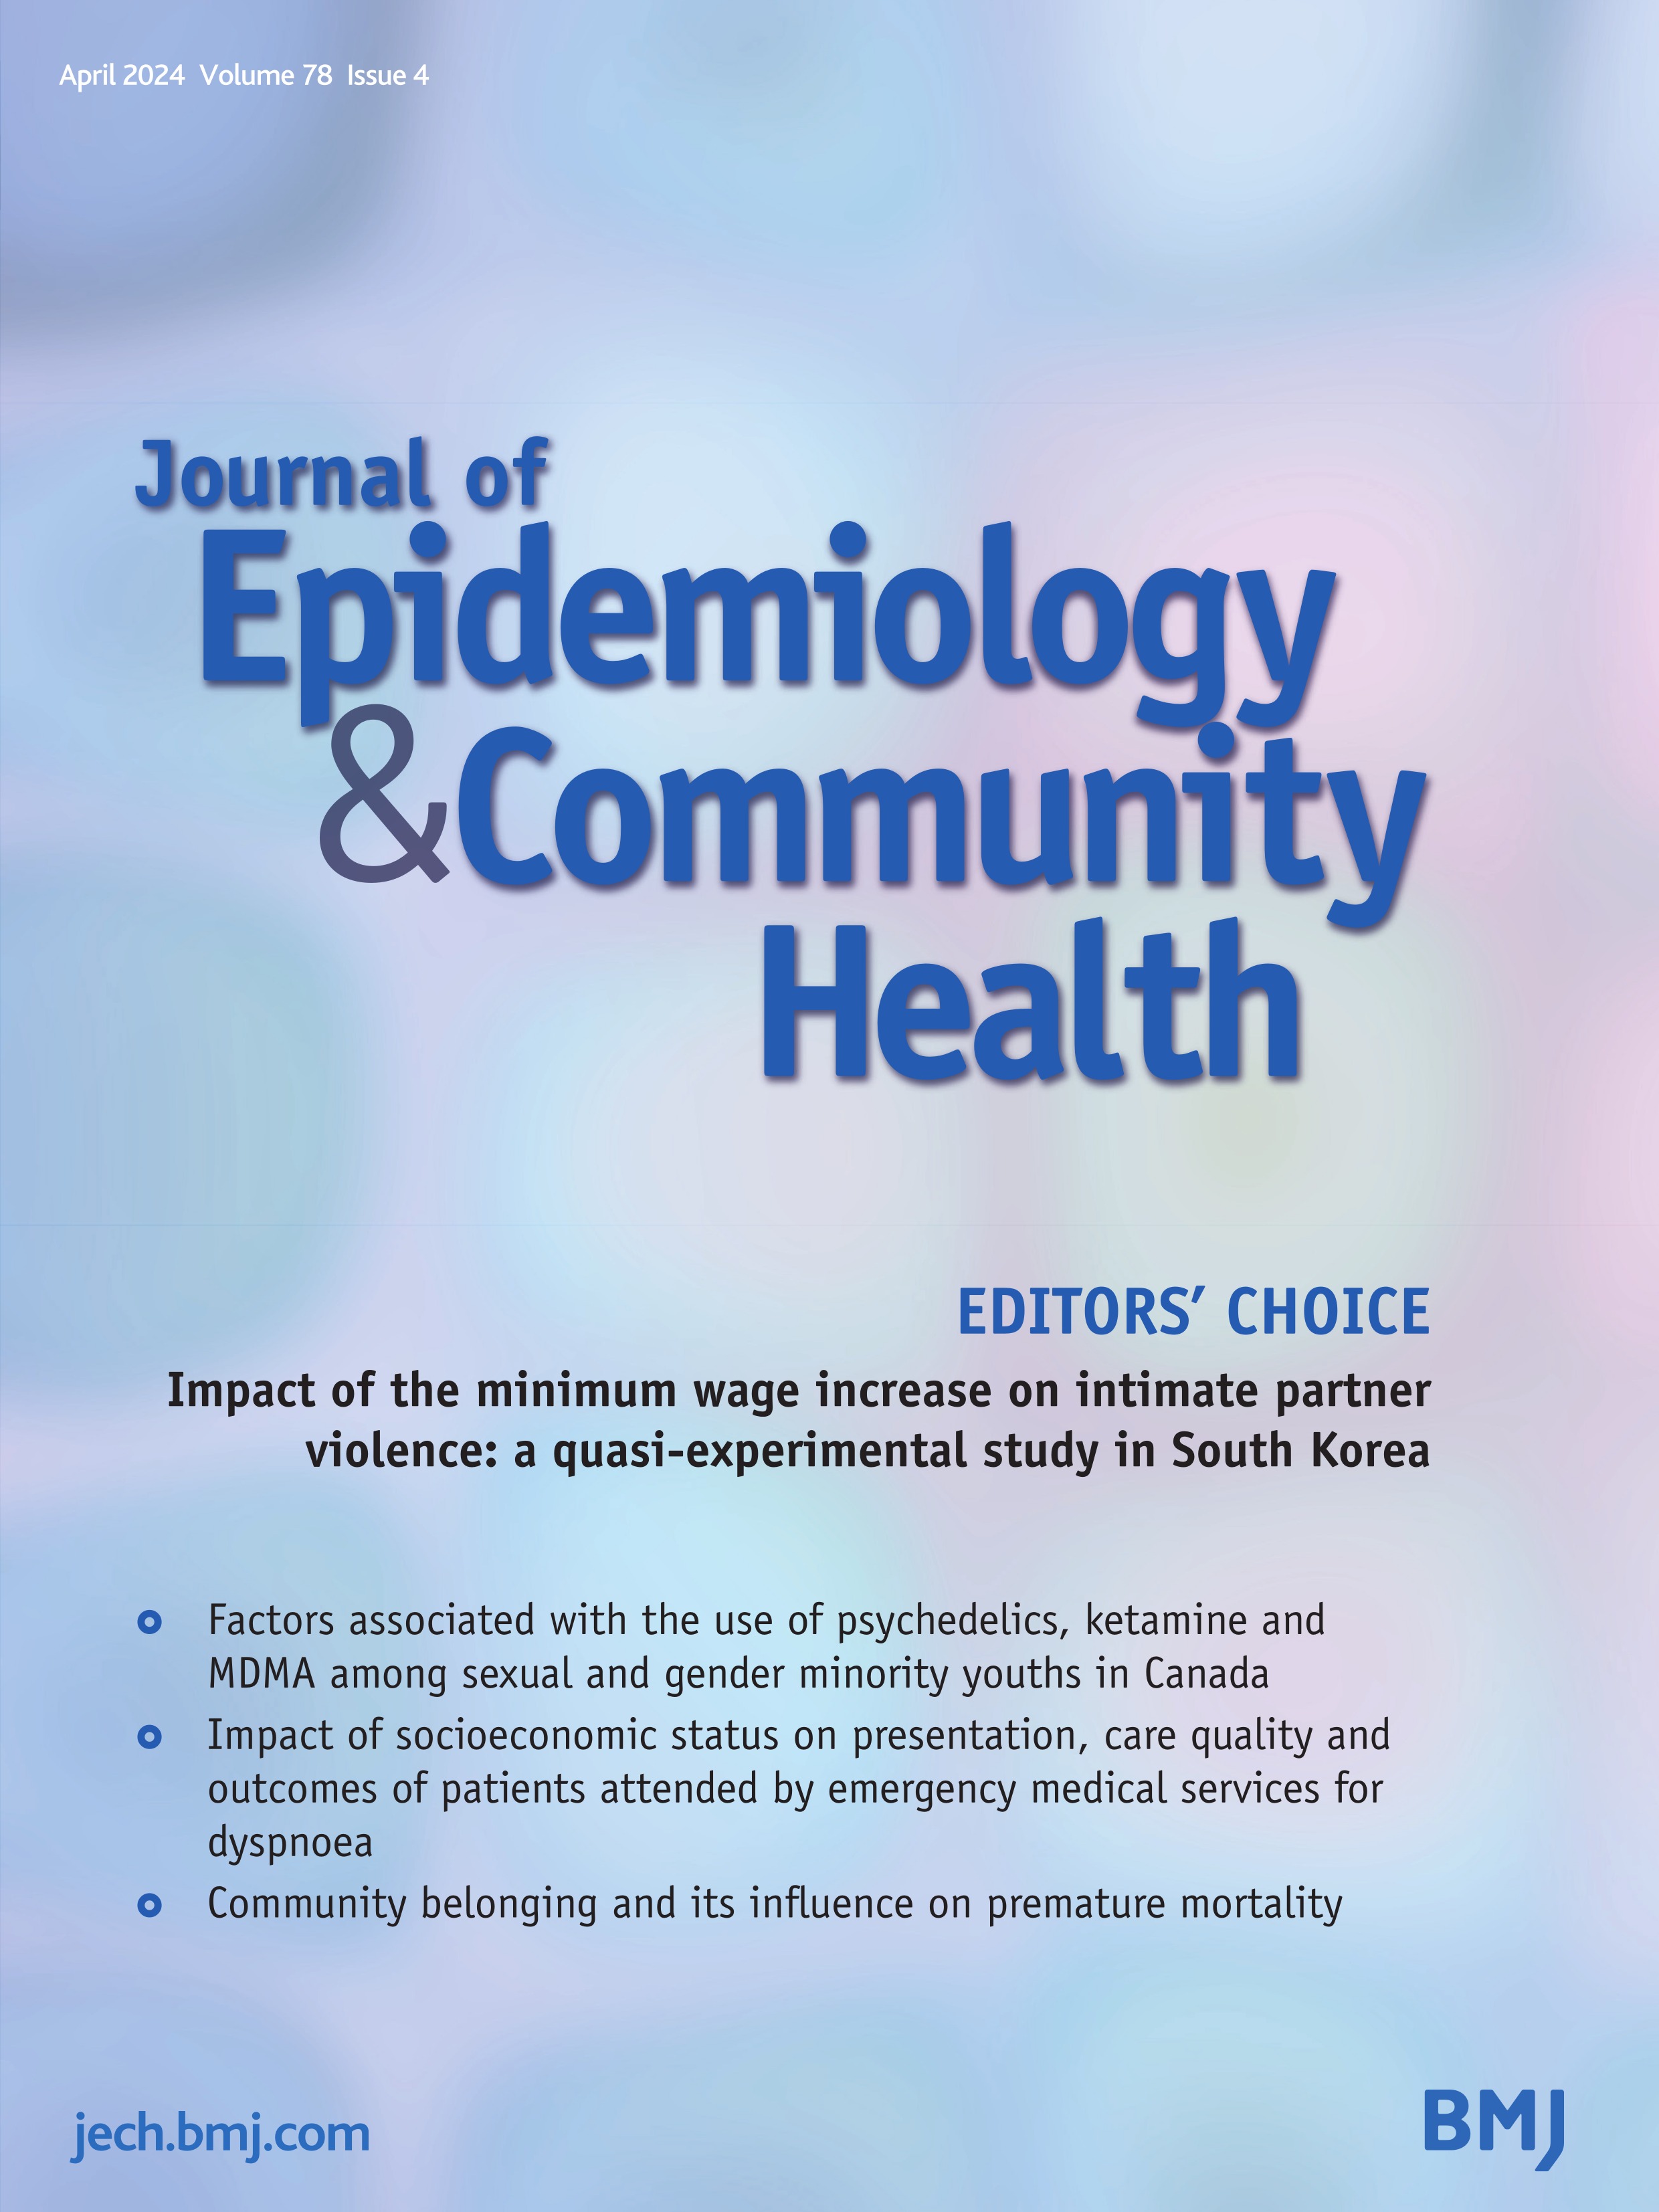 Multistate survival modelling of multimorbidity and transitions across health needs states and death in an ageing population